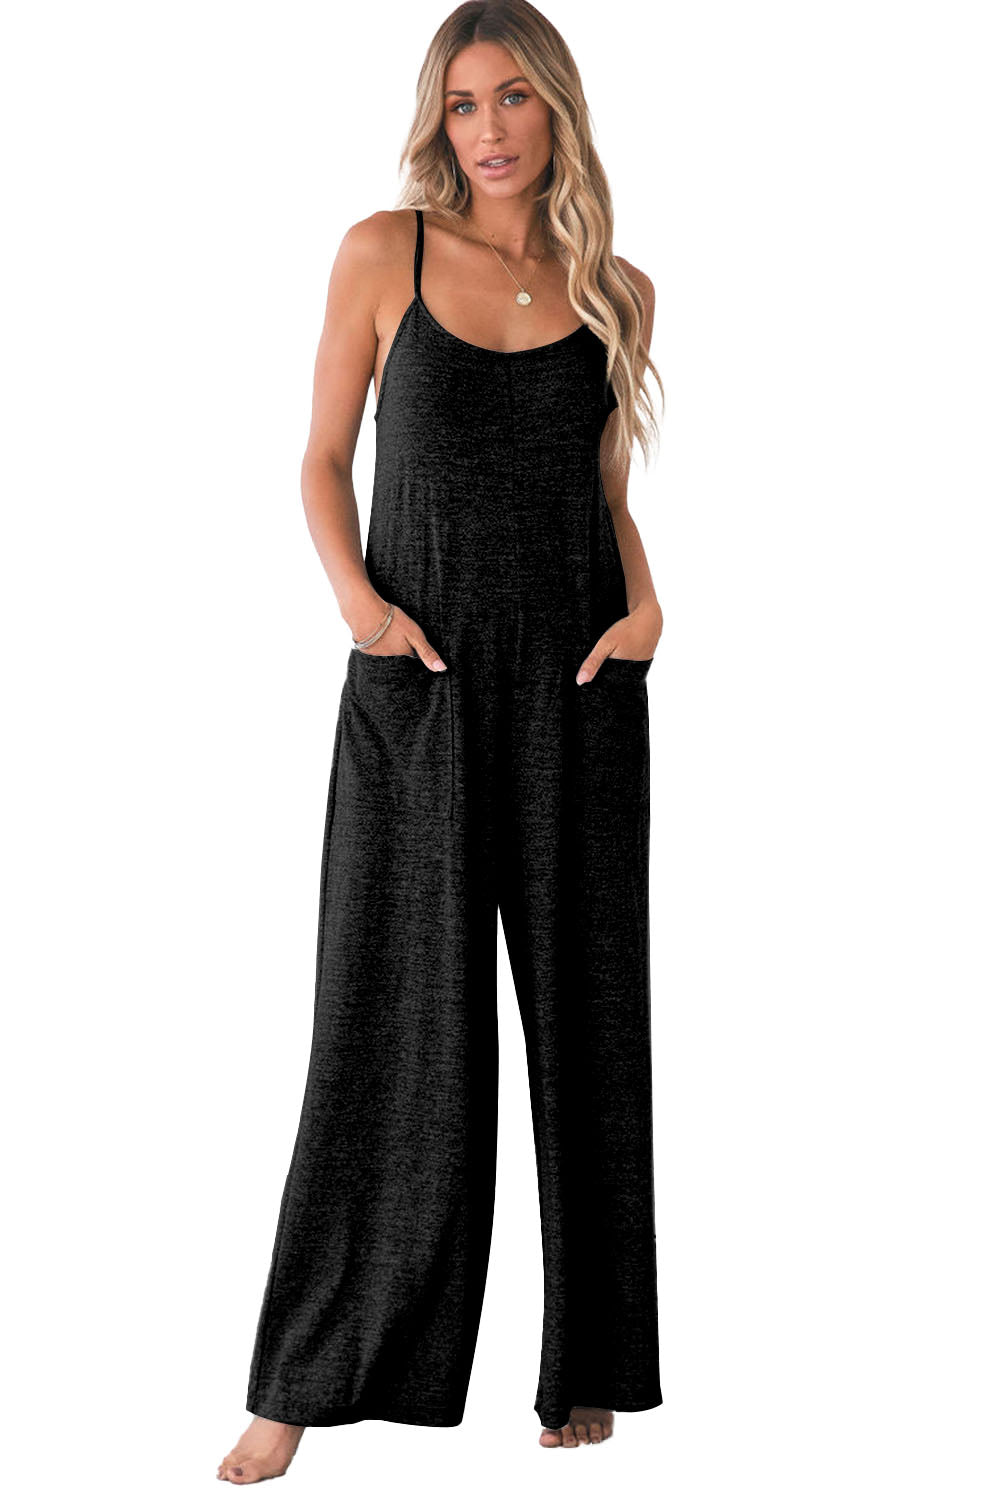  Wekumgy Women's Casual Jumpsuits Sleeveless Spaghetti Strap  Stretchy Comfy Harem Pants Baggy Overalls Jumpers with Pockets Oatmeal :  Clothing, Shoes & Jewelry